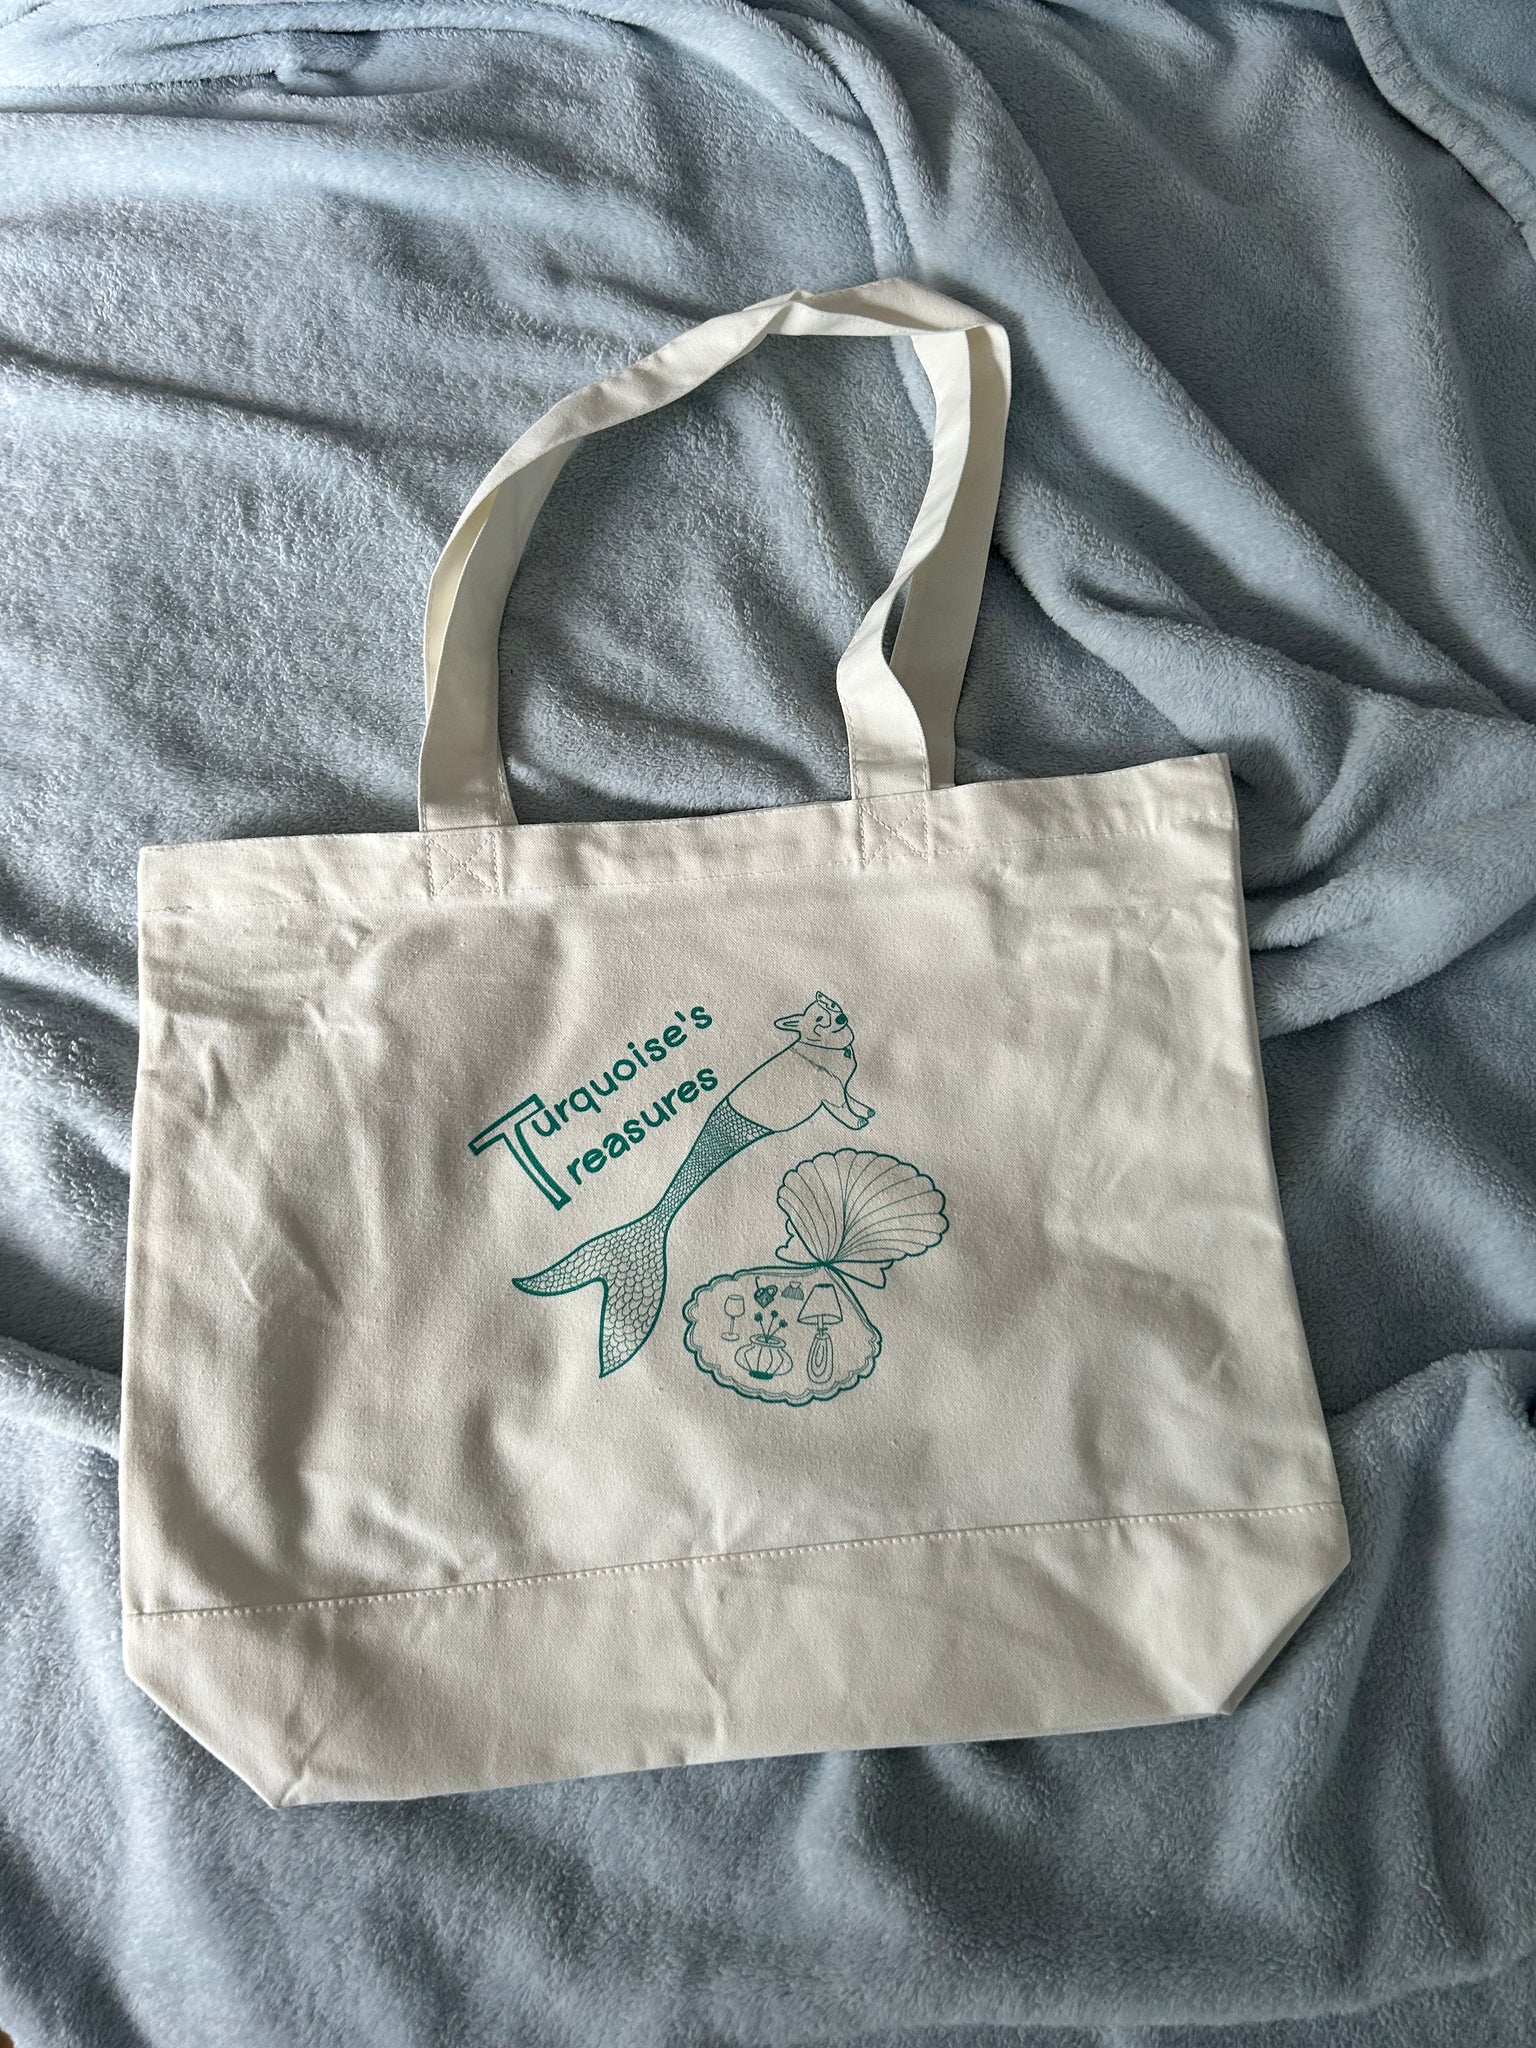 XL Turquoise’s Treasures tote bag